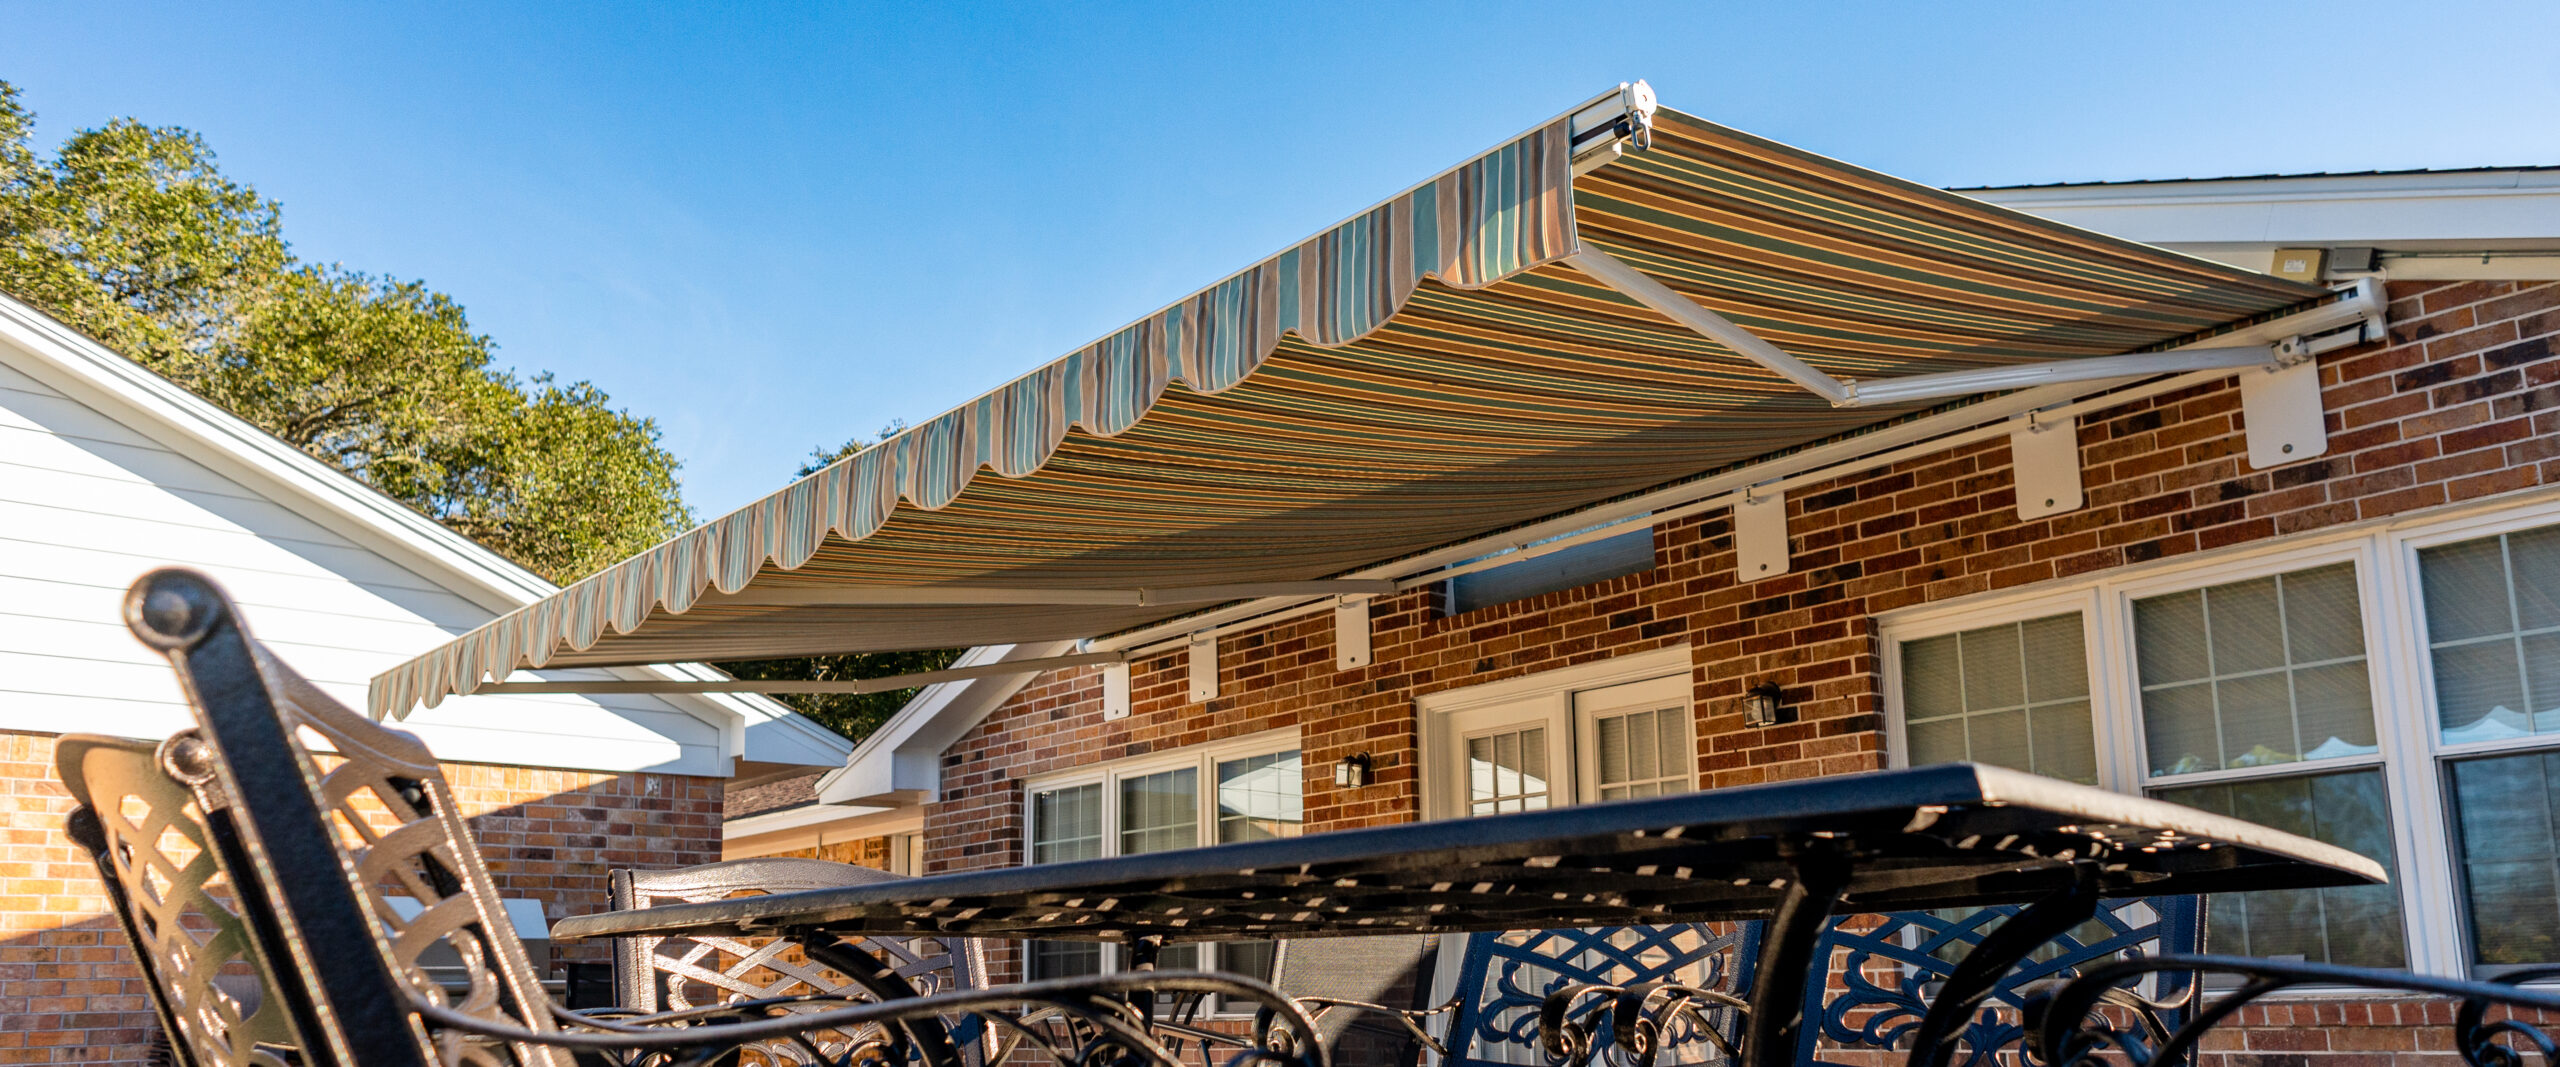 Large Retractable Awning with Green, Orange, and Brown Stripes